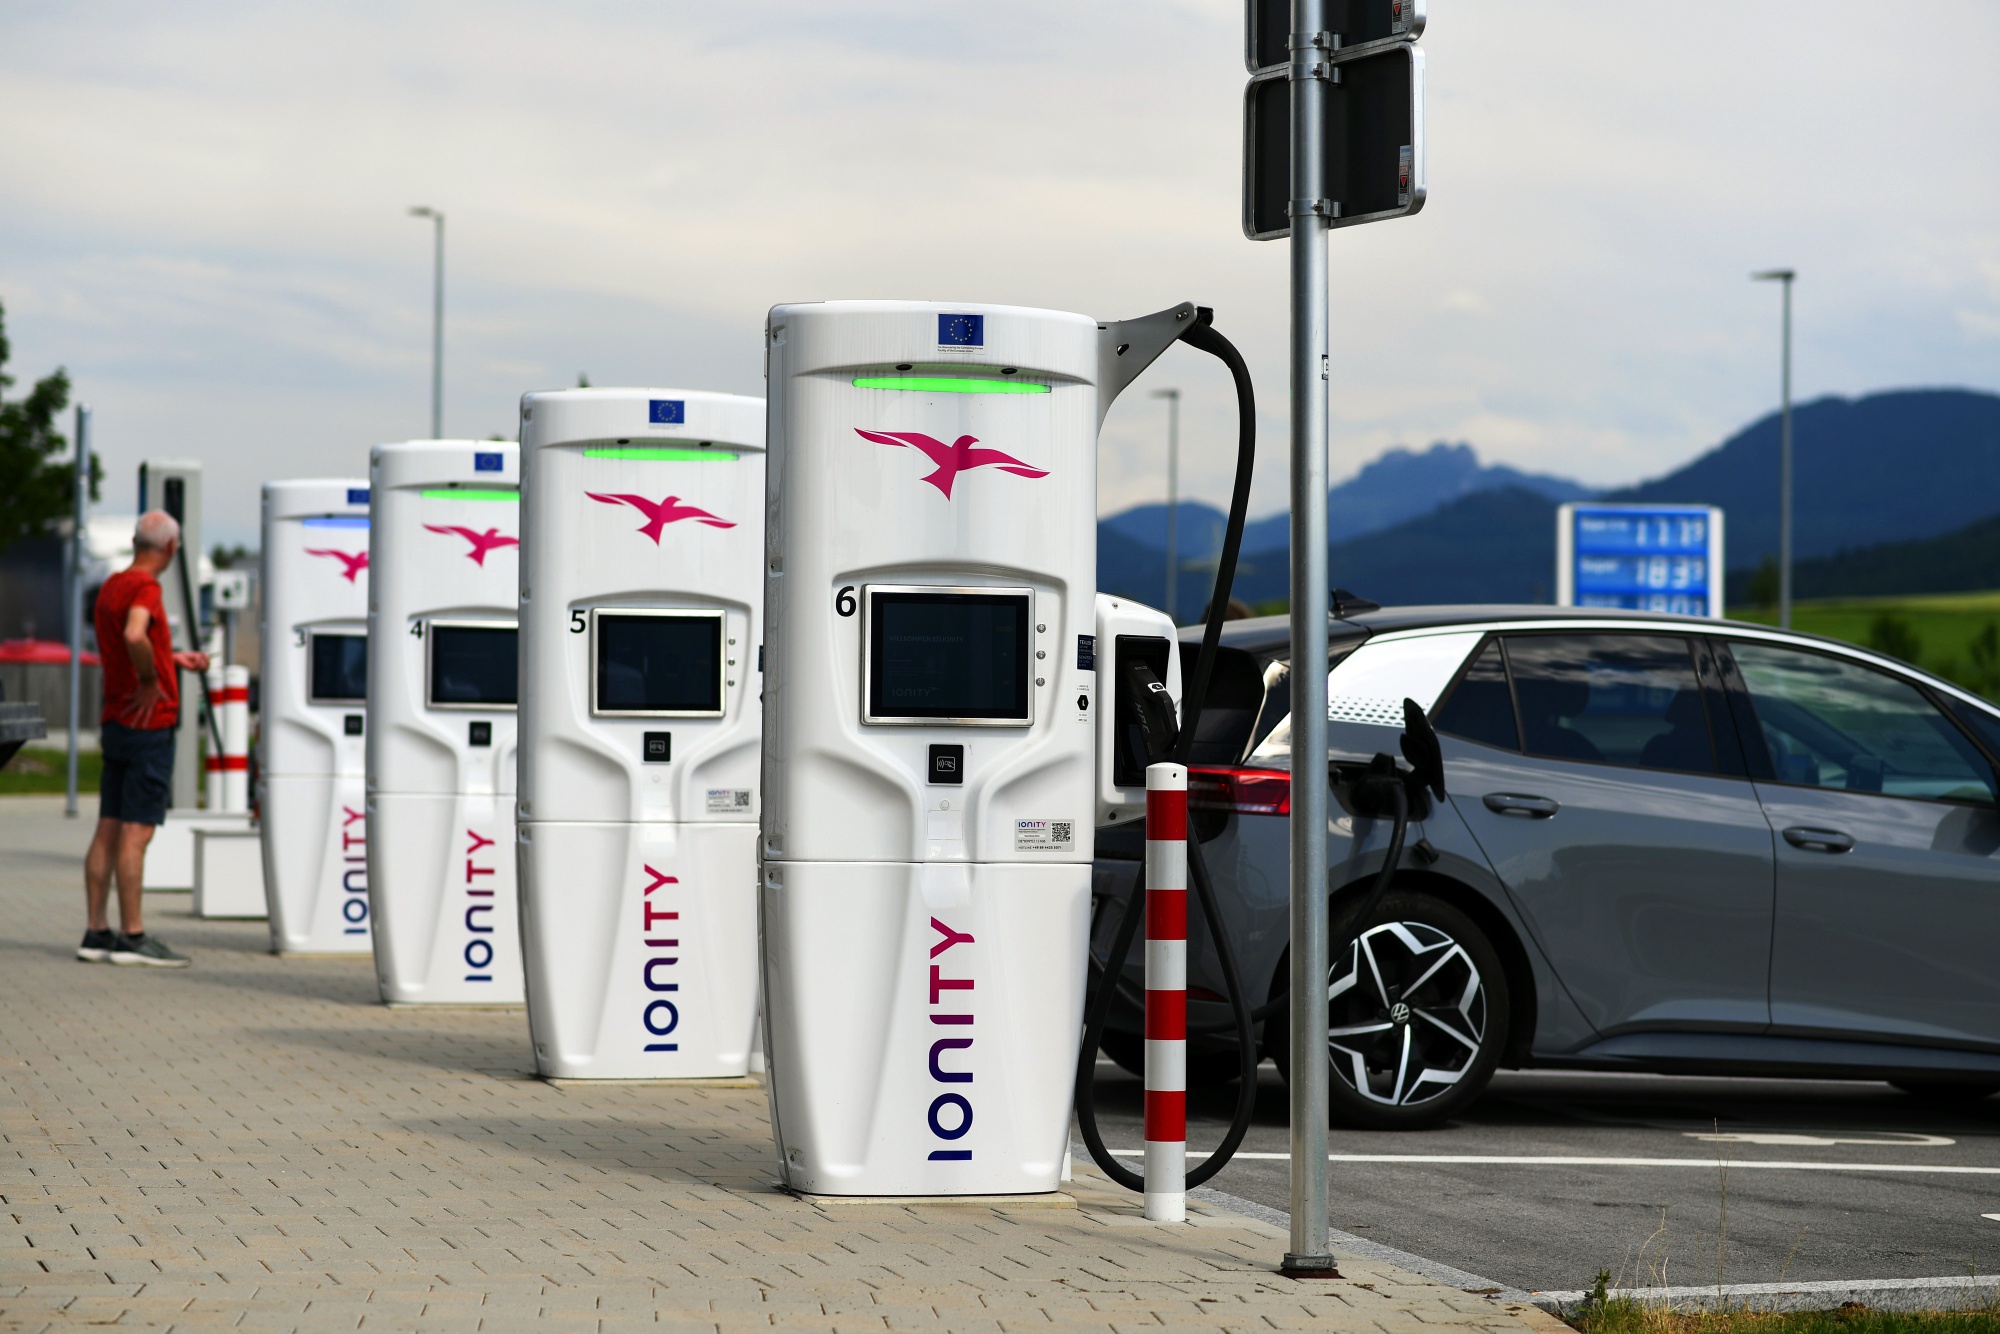 Europe Will Need 65 Million Electric Vehicle Chargers by 2035 - Bloomberg